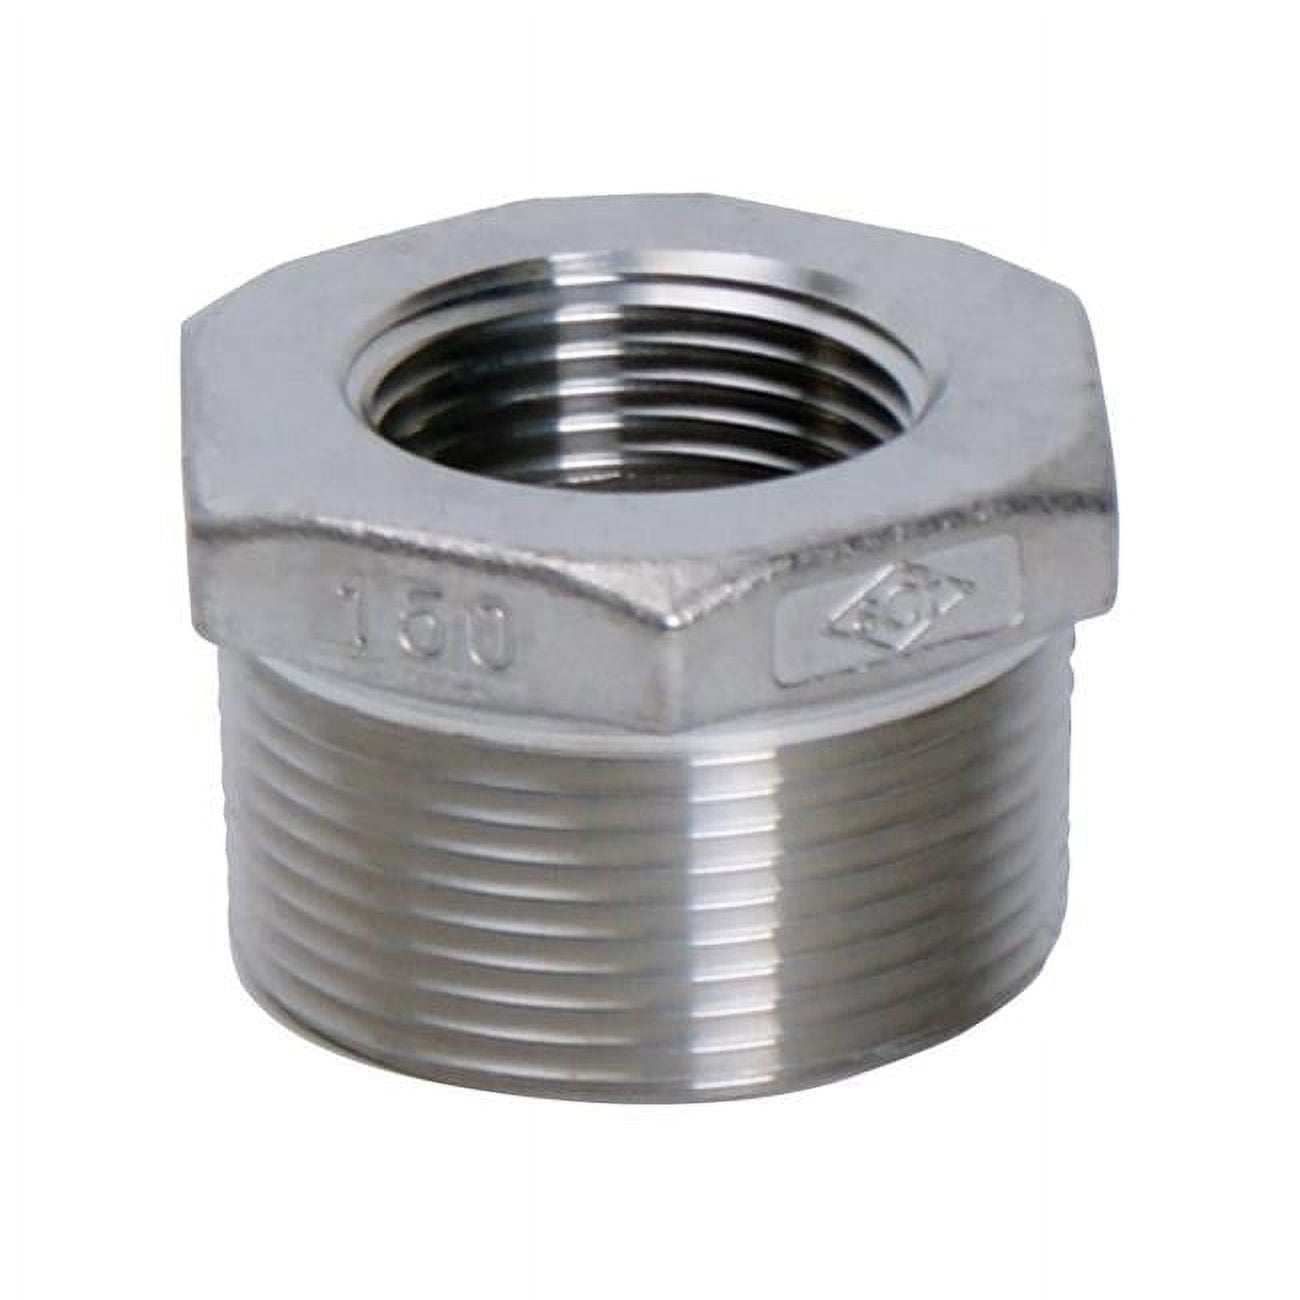 4809935 Stainless Steel Hex Bushing - 1.25 In. Mpt X 0.5 In. Dia. Fpt